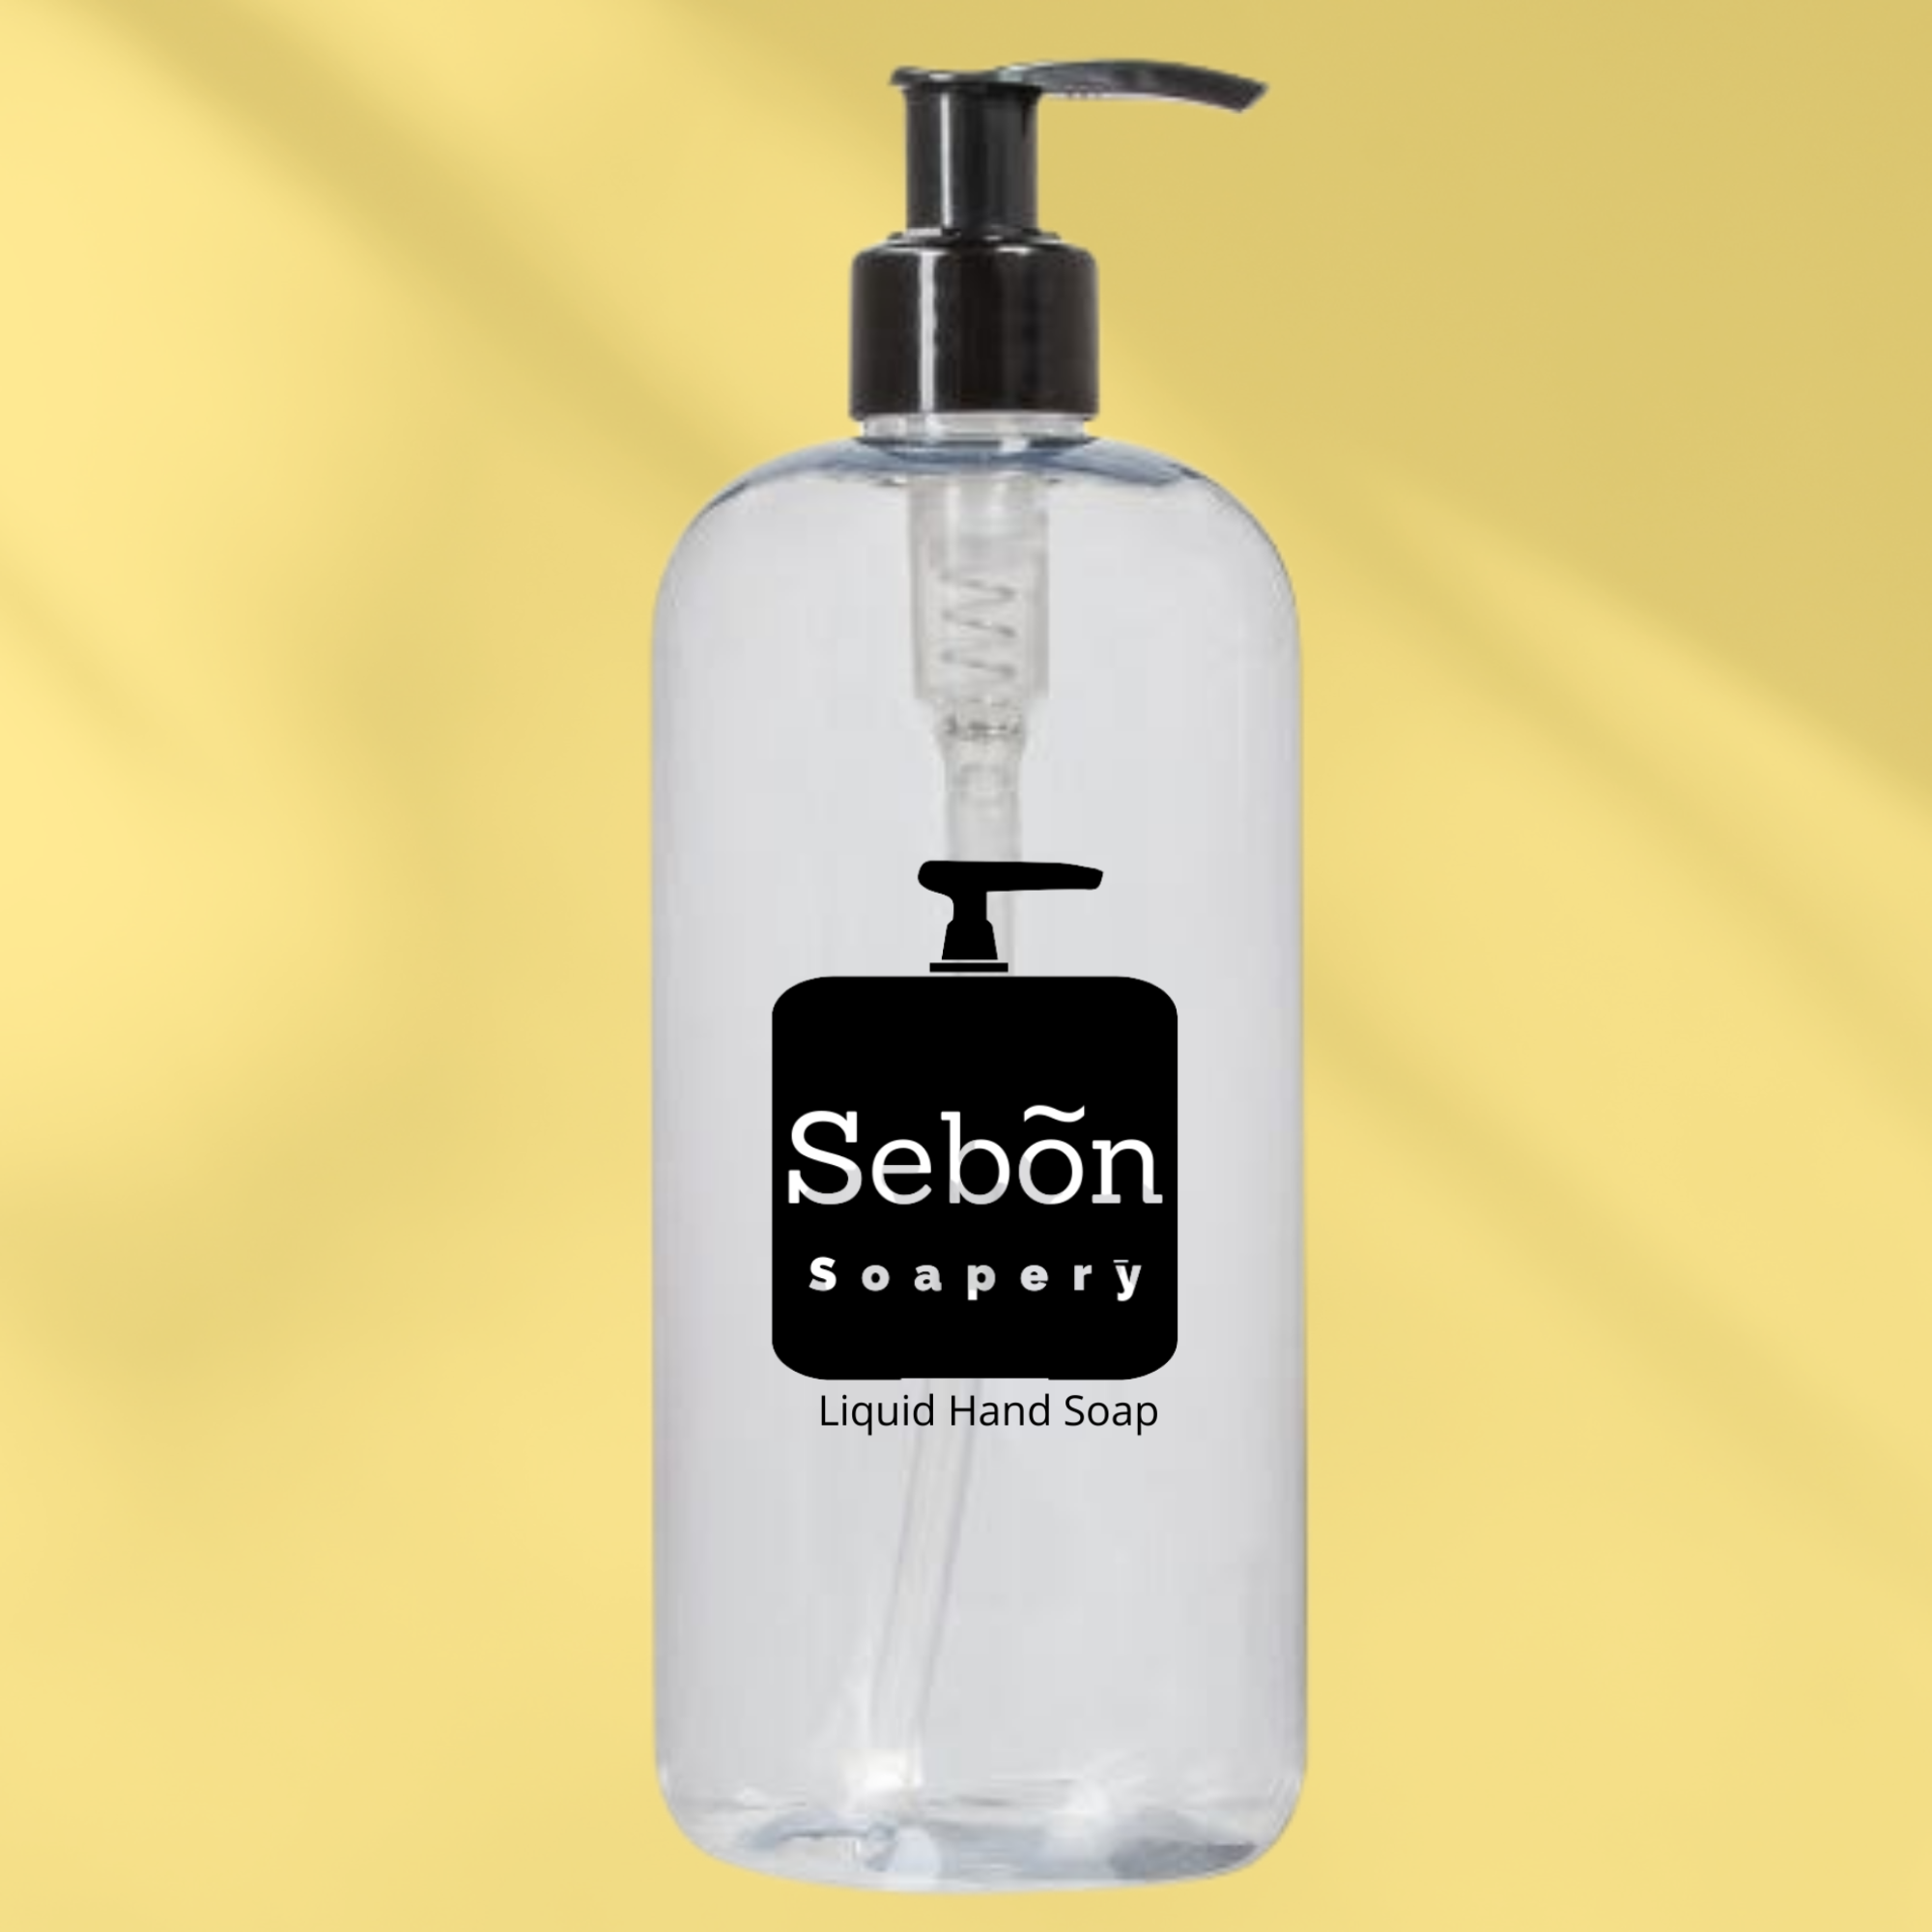 Sebon Banana Bay Rum Scented Liquid Hand Soap with Olive Oil For Men